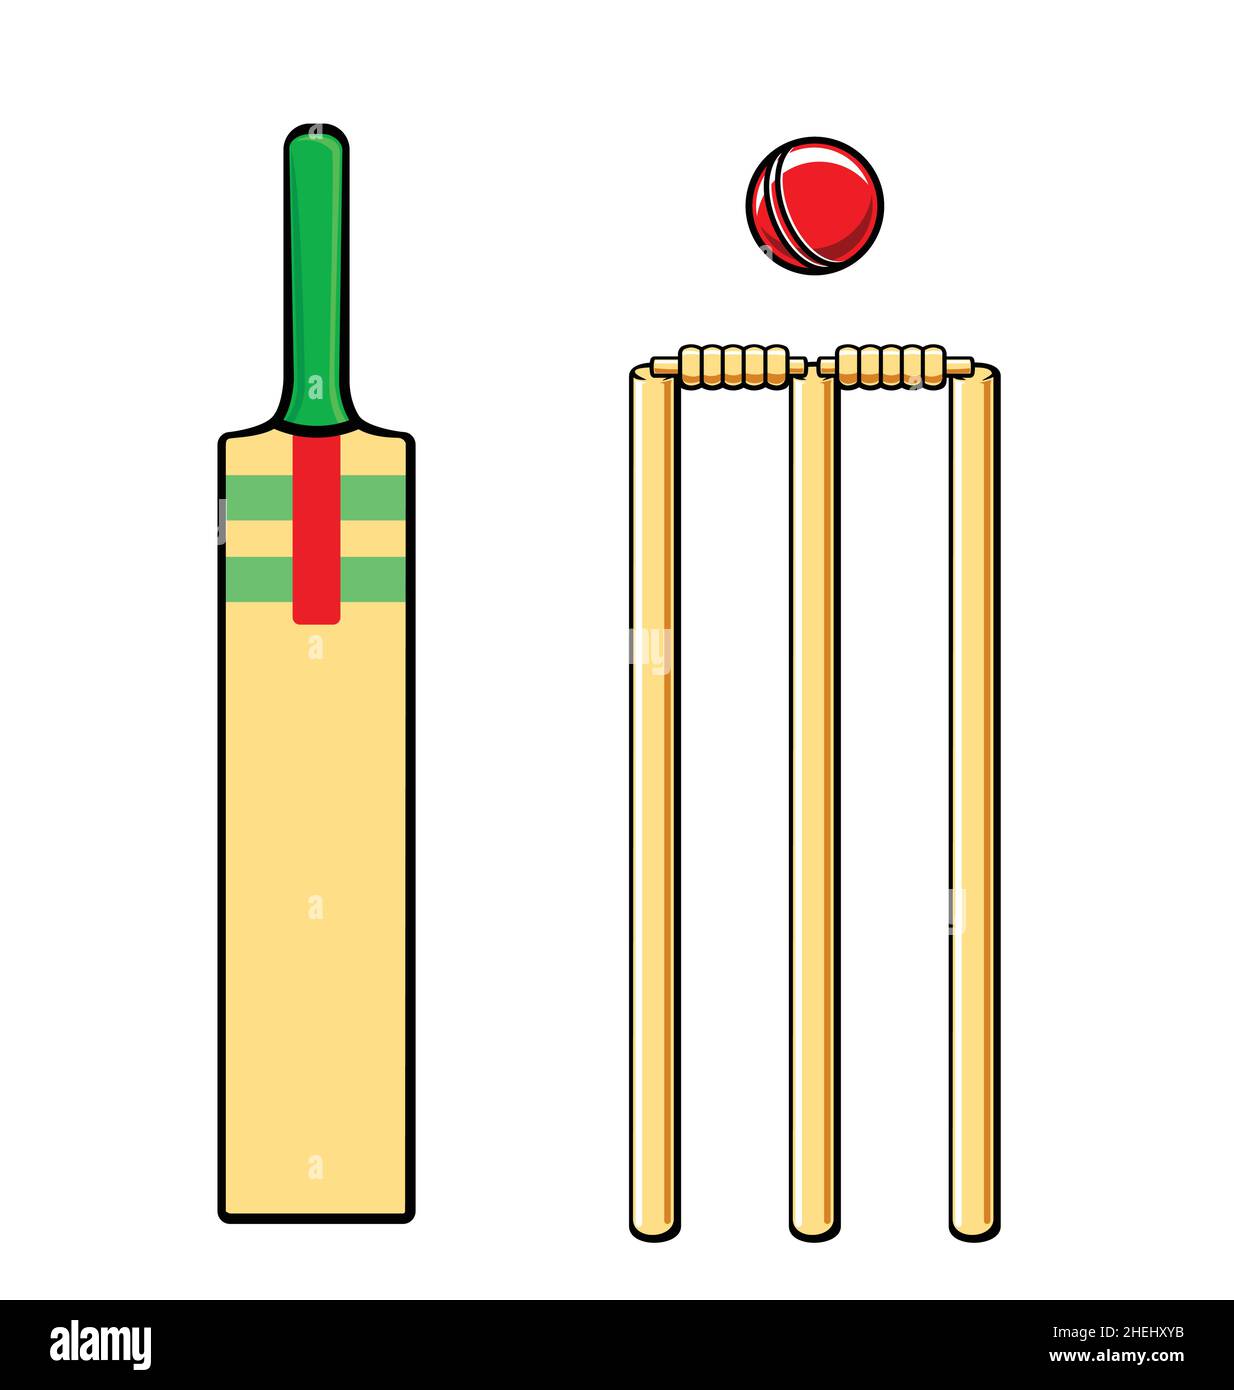 simple cartoon stylised cricket set bat stumps bails and red ball vector isolated on white background Stock Vector